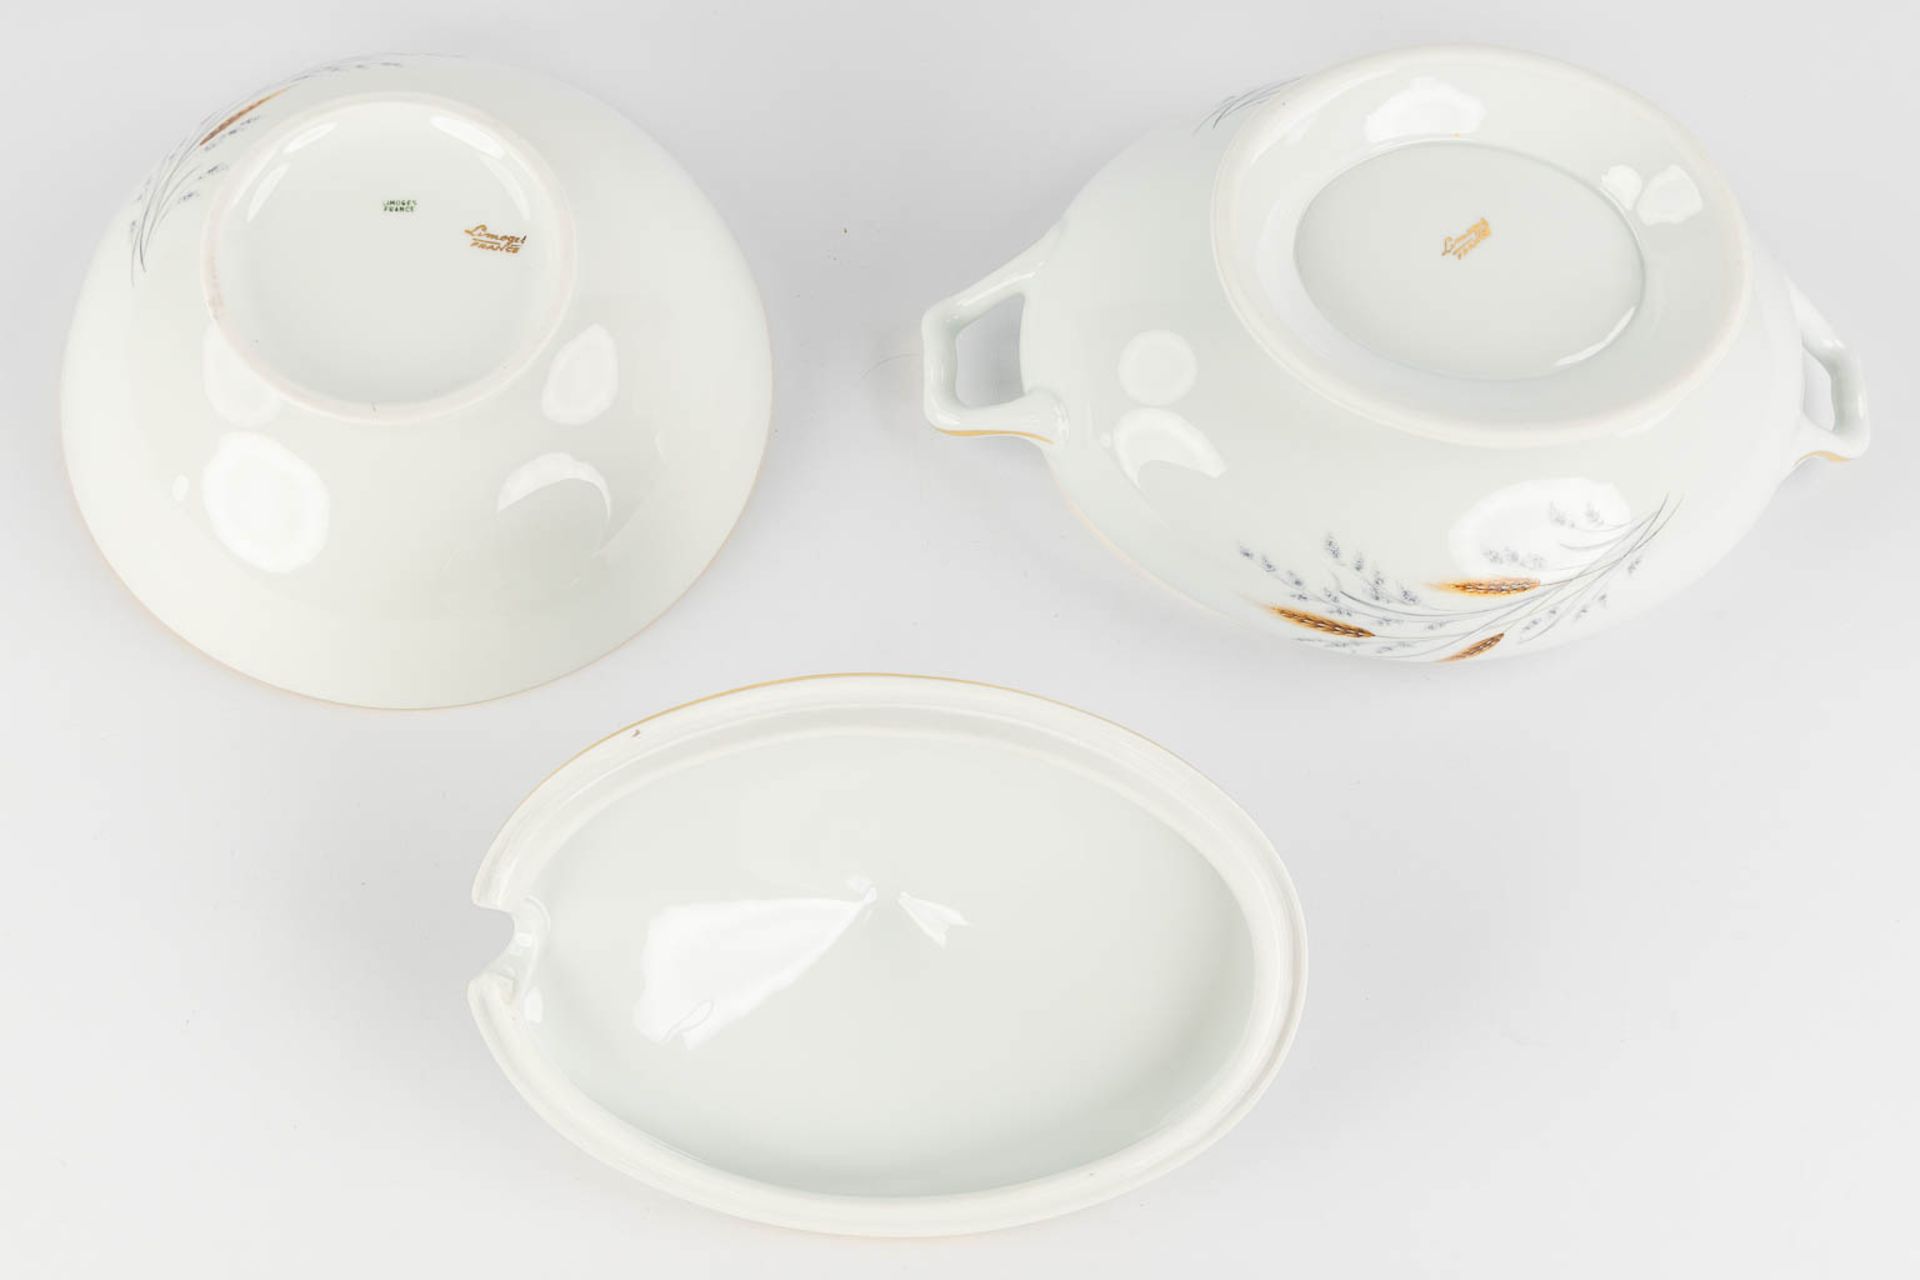 Limoges, France, a large, 12-person dinner, wild and coffee service. (L:23 x W:34 x H:22 cm) - Image 15 of 28